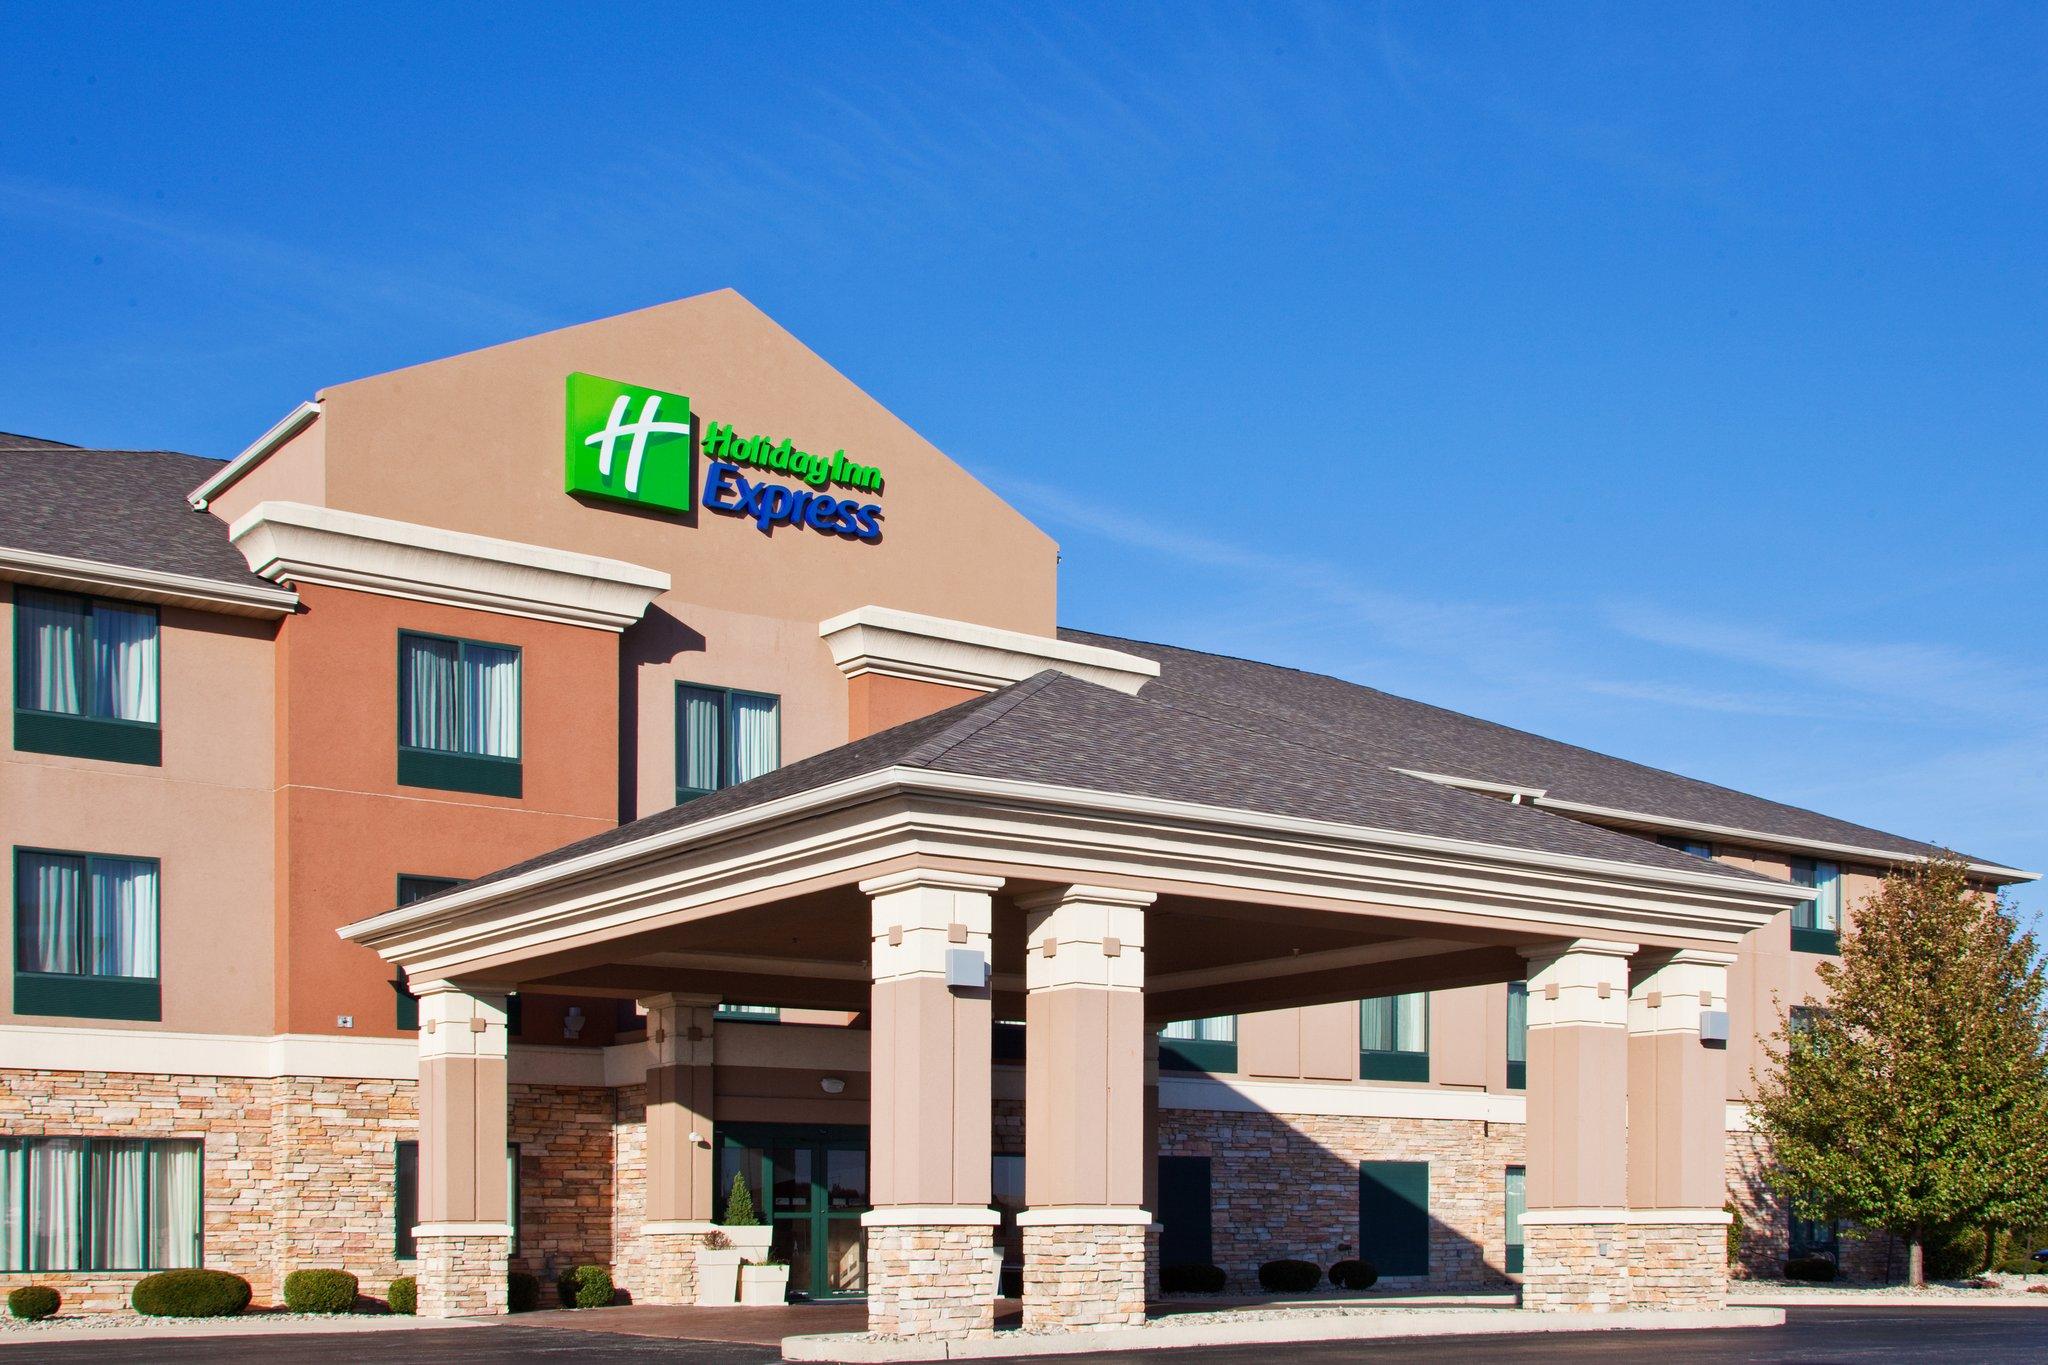 Holiday Inn Express Hotel Gas City in Gas City, IN